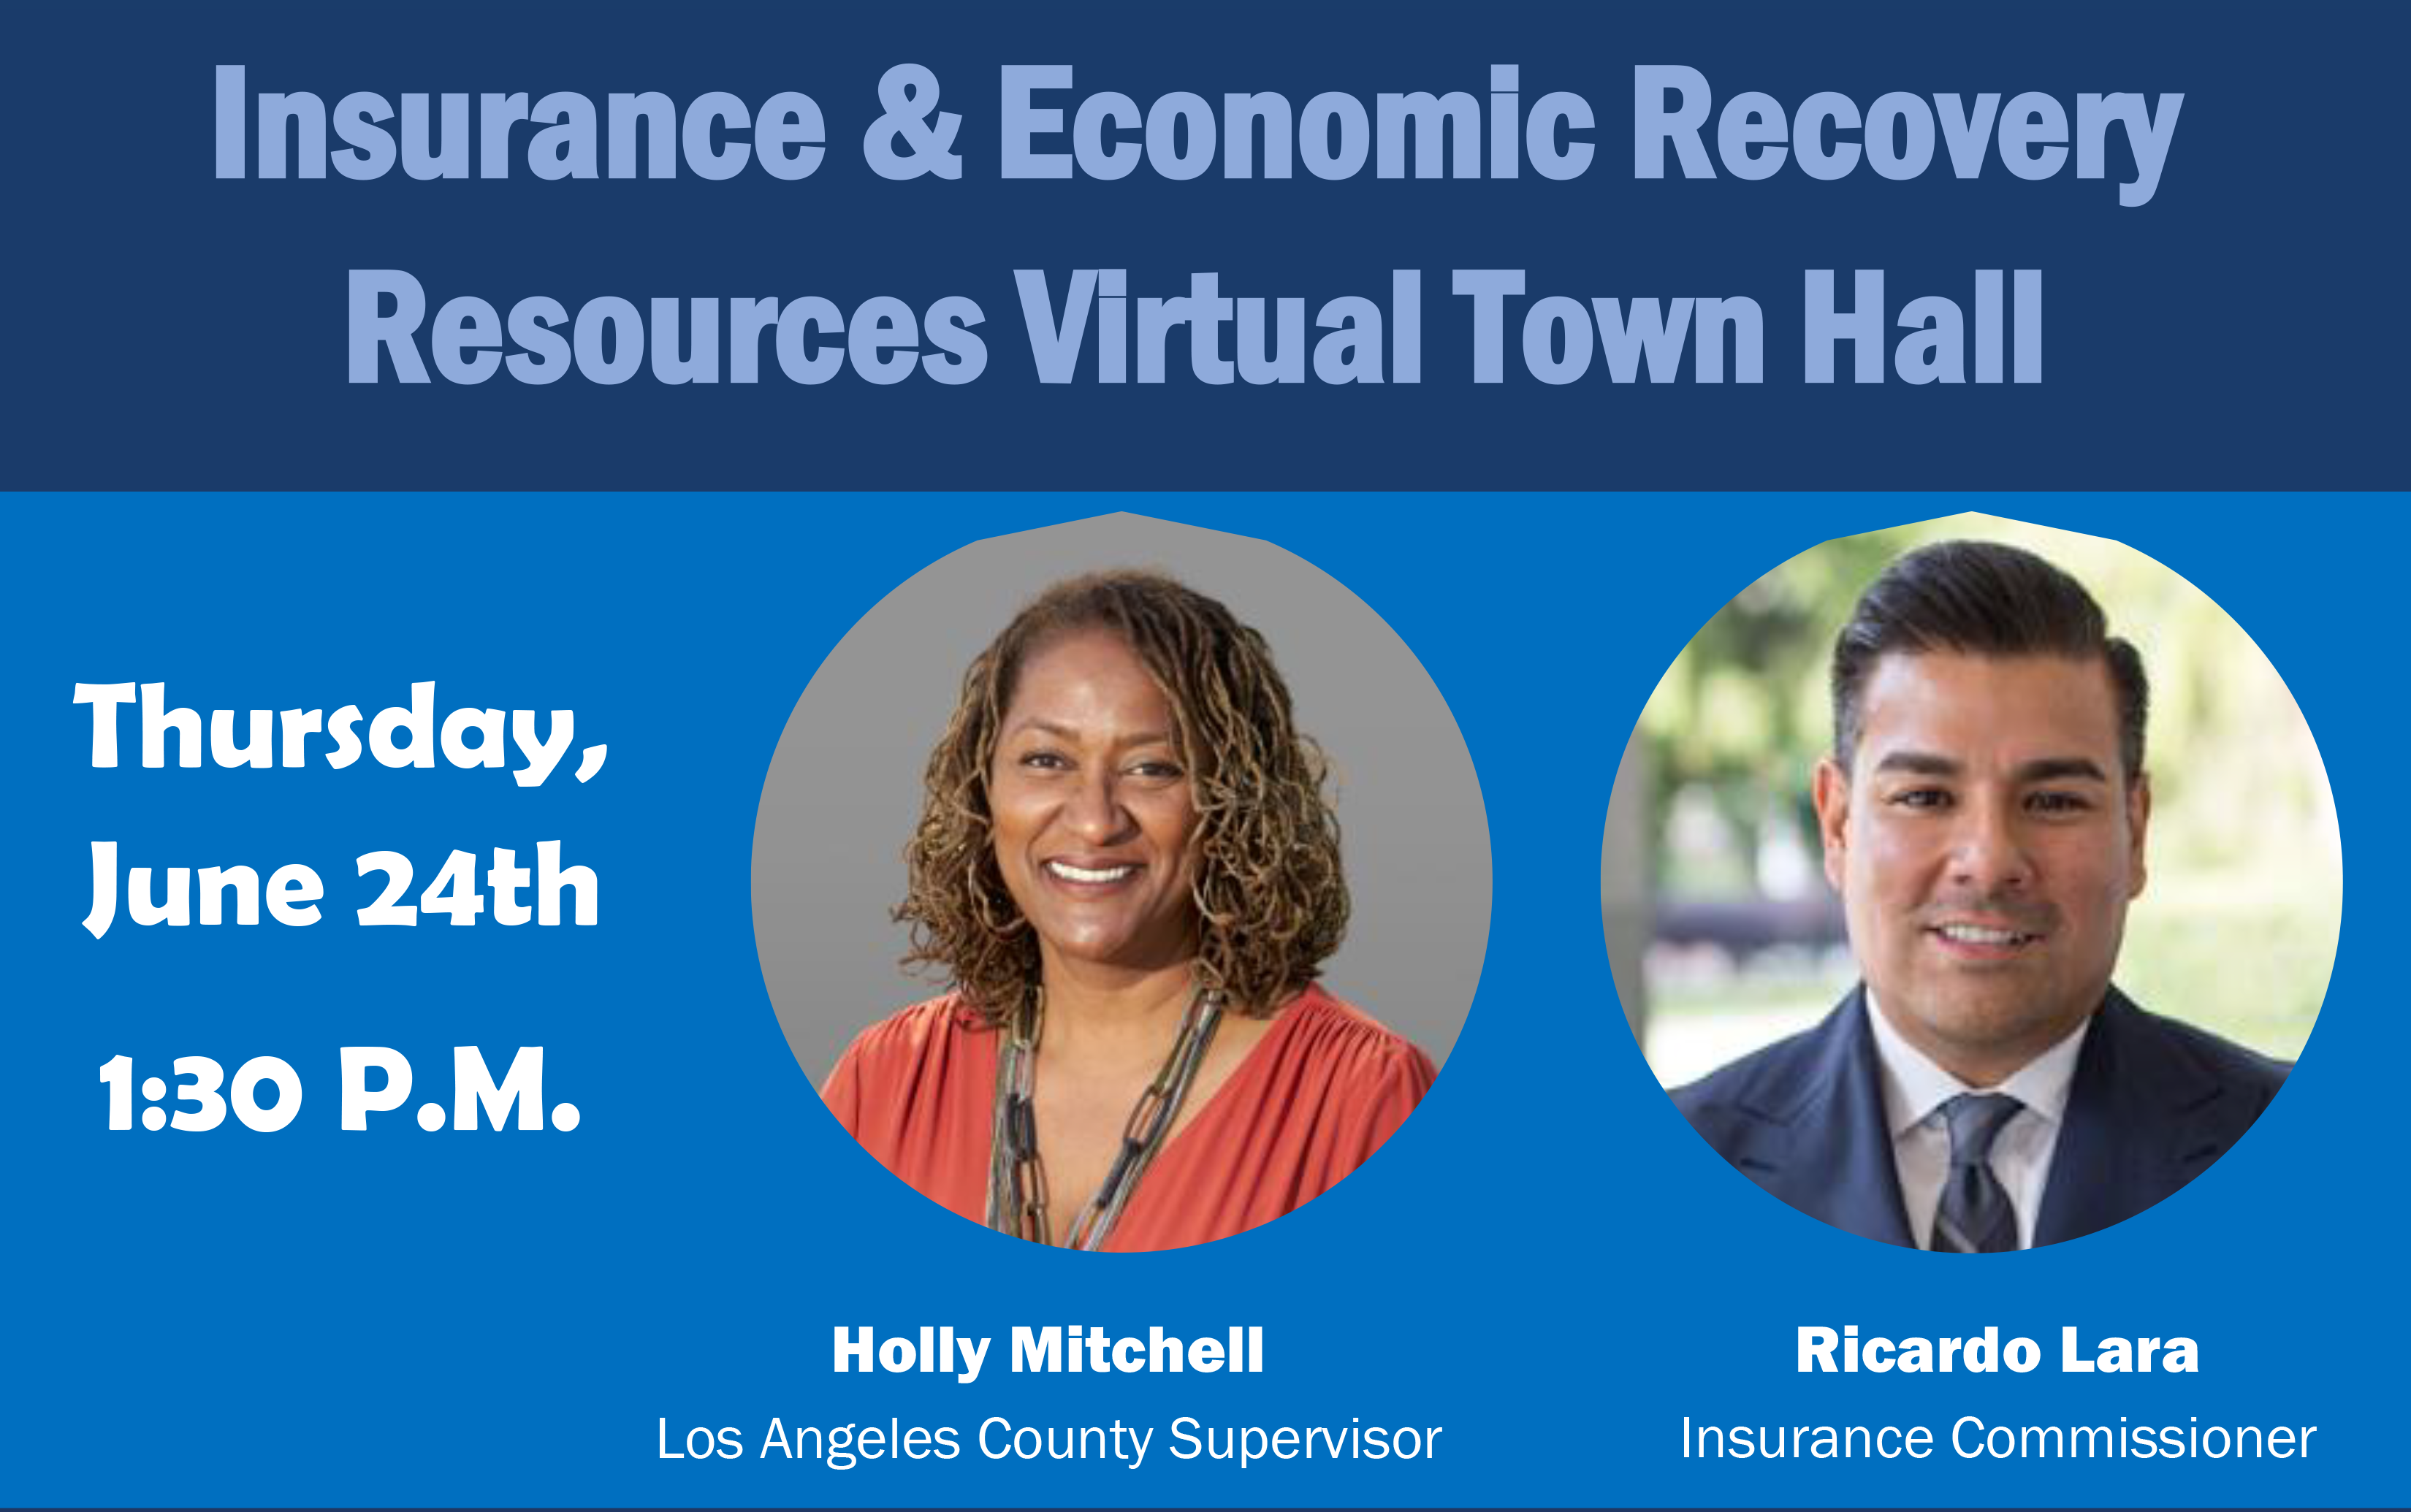 Insurance &amp; Economic Recovery Resources Virtual Town Hall
Thursday,
June 24th
1:30 P.M.
LA County Supervisor Holly Mitchell and Insurance commissioner Ricardo Lara